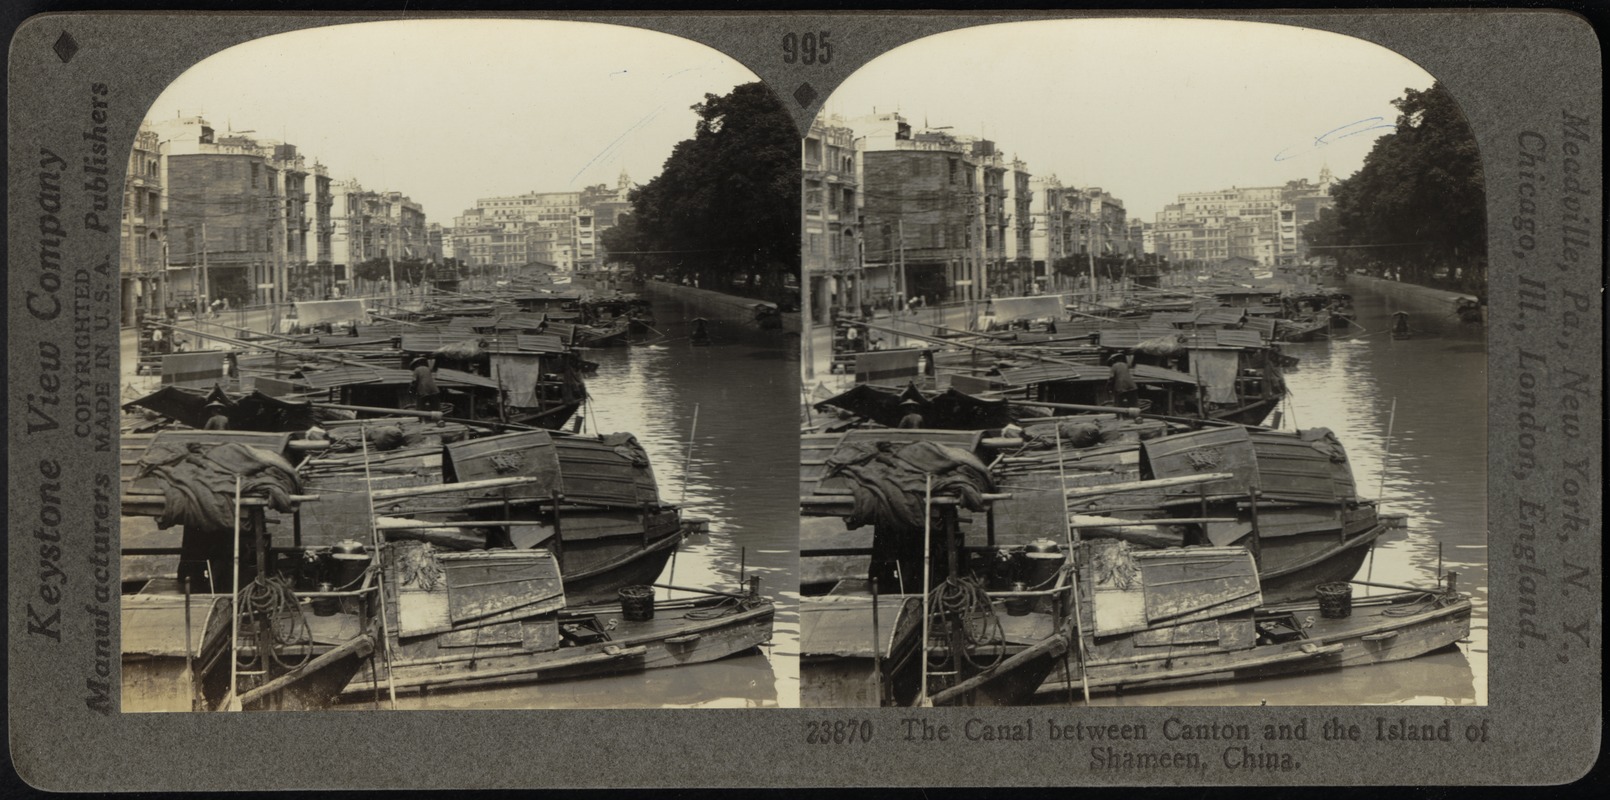 The canal between the Bund of Canton and the Island of Shameen